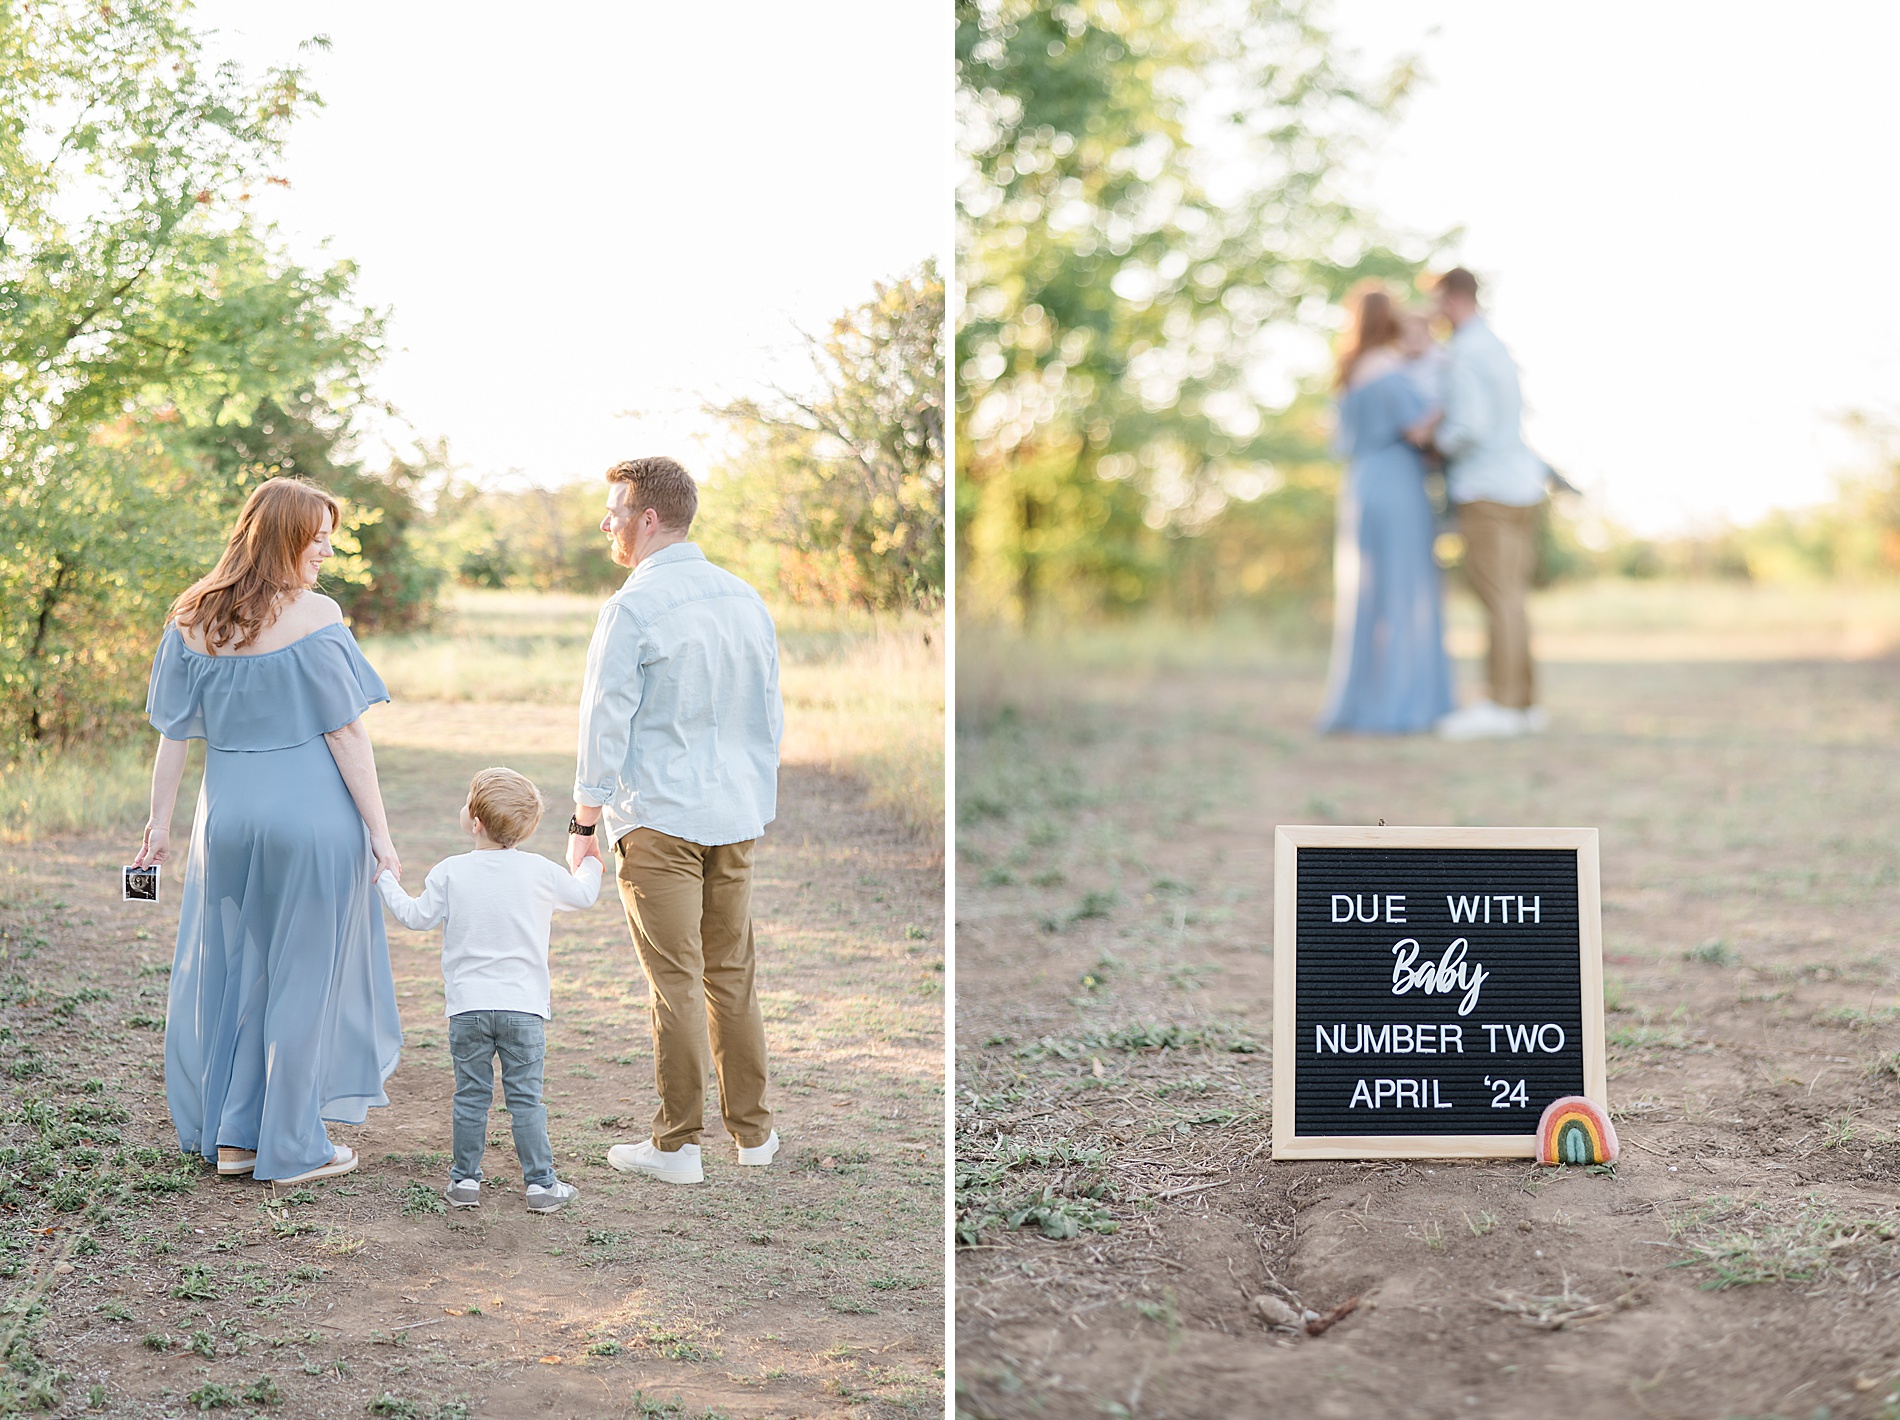 Pregnancy announcement sign that reads due with baby number two taken by Lindsey Dutton Photography, a Dallas maternity photographer
